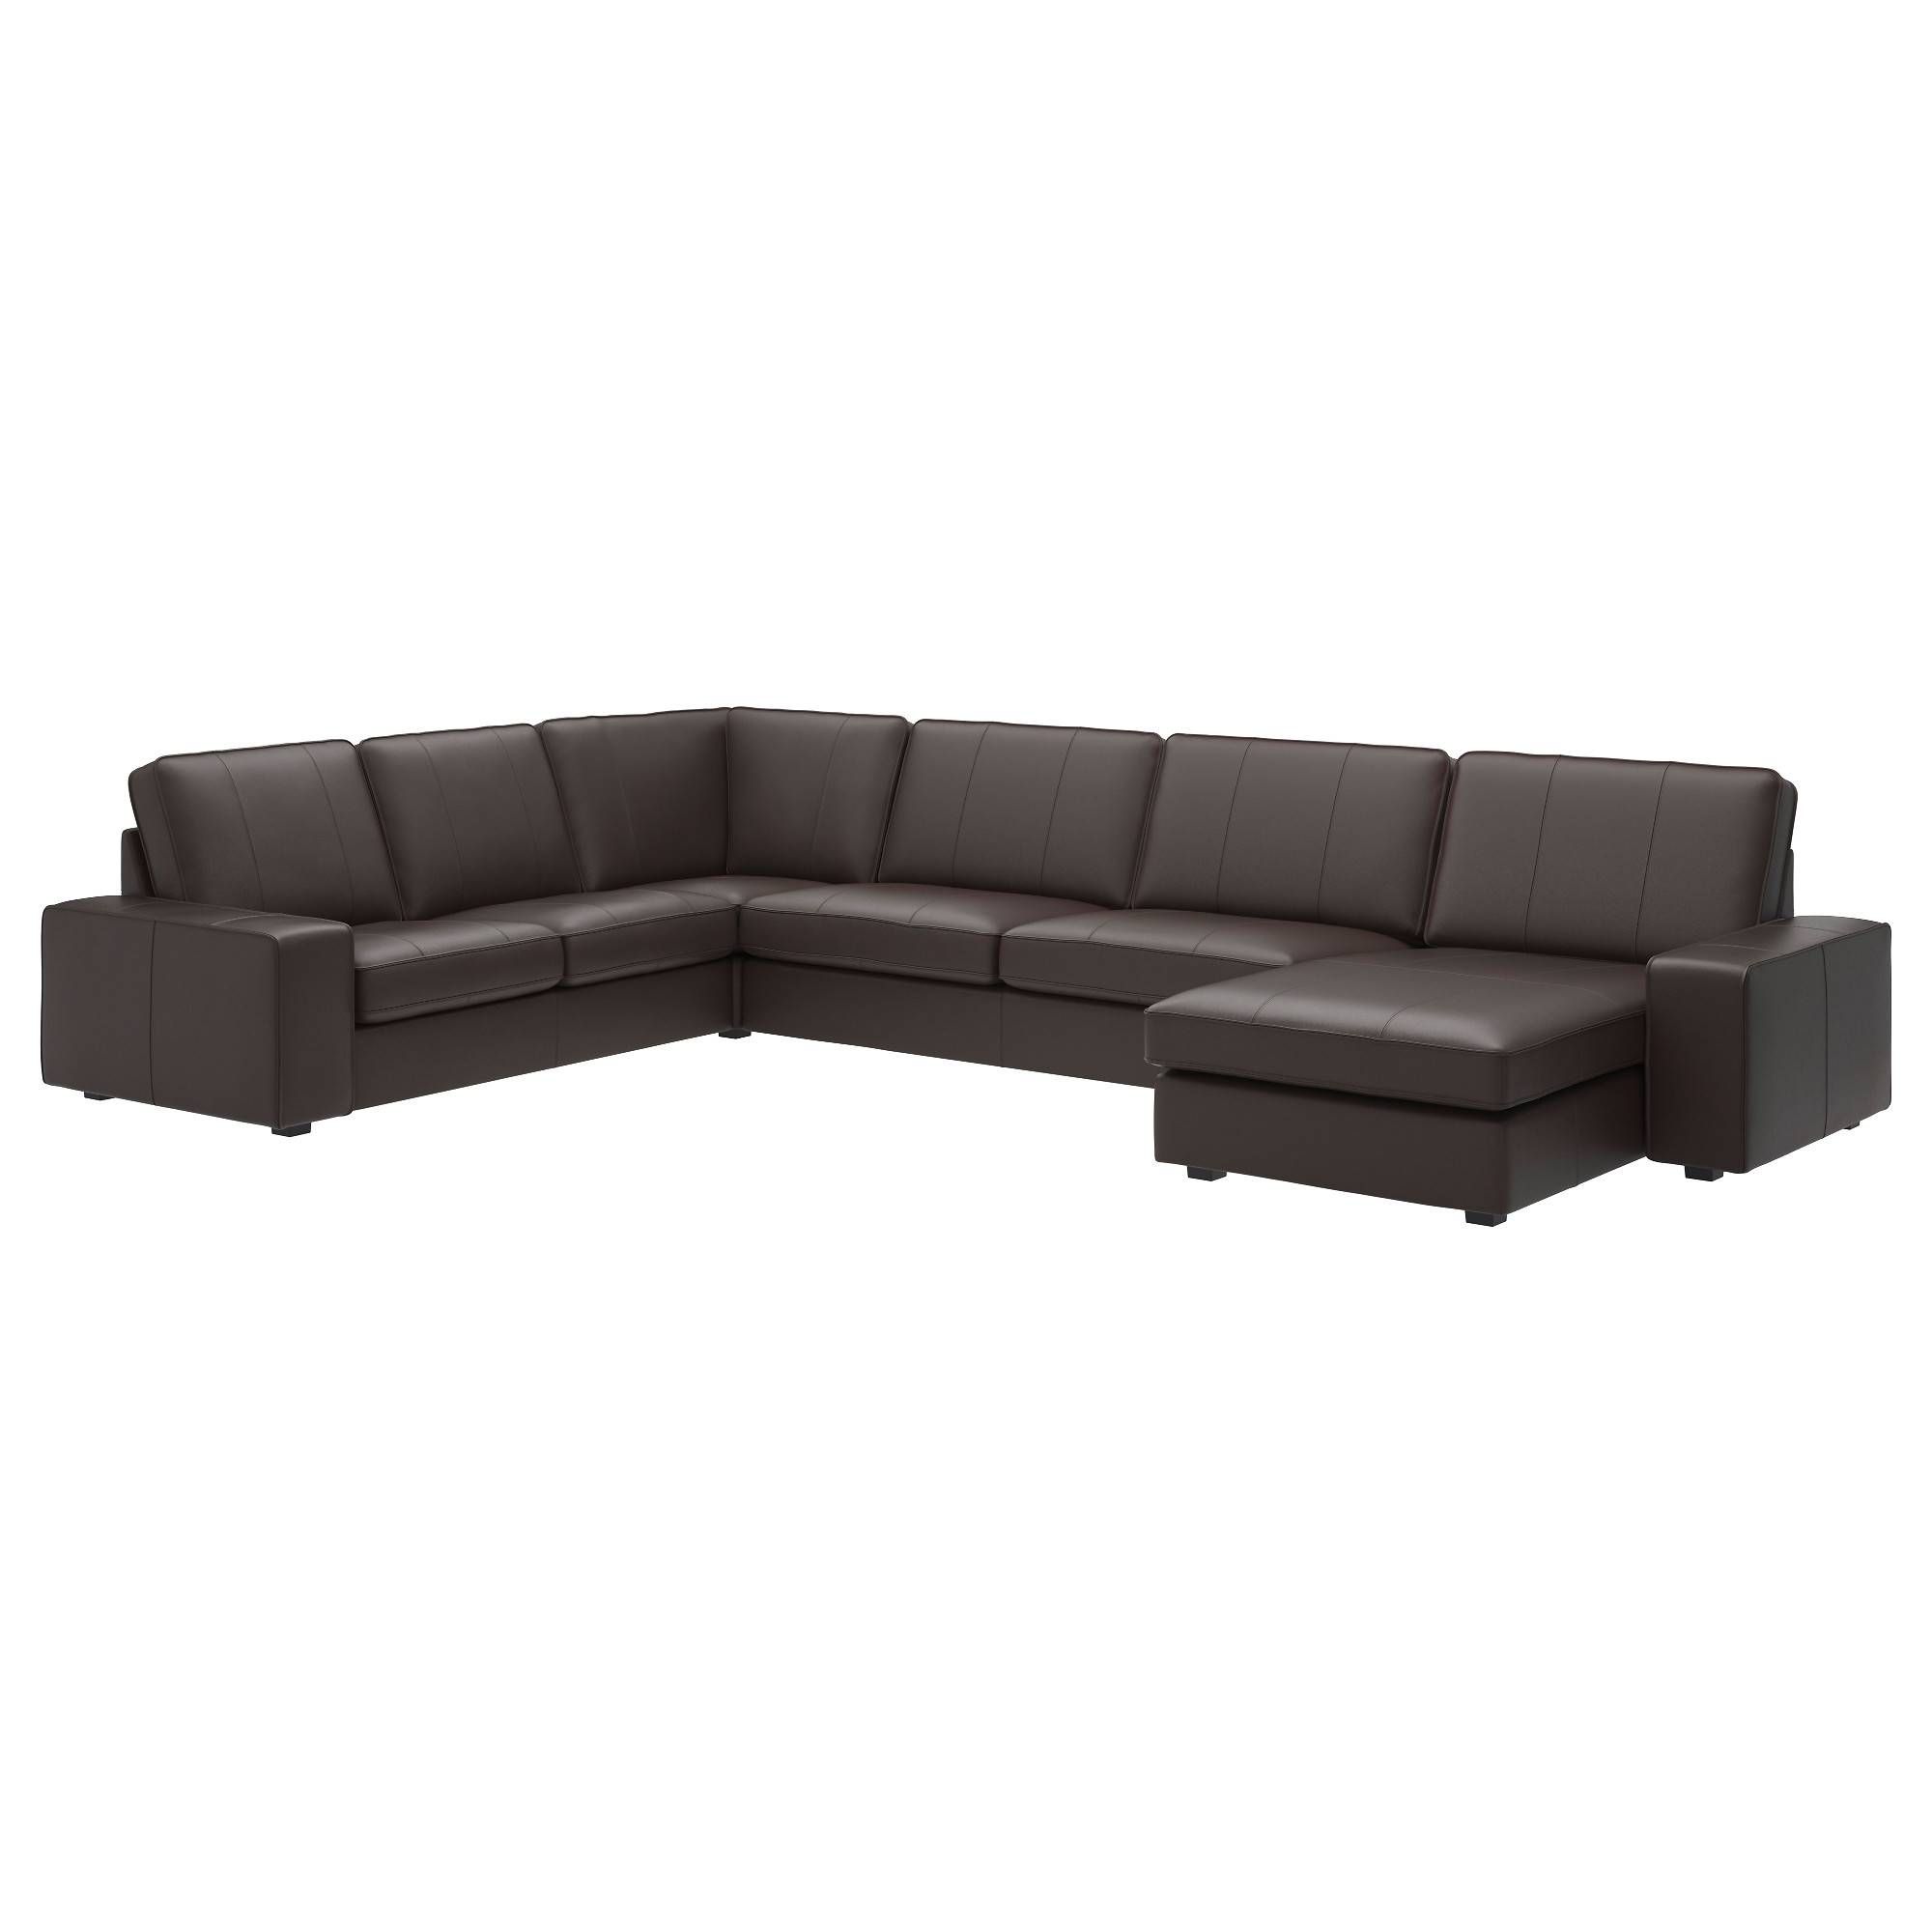 Leather & Faux Leather Couches, Chairs & Ottomans – Ikea Pertaining To White Sofa Chairs (View 11 of 30)